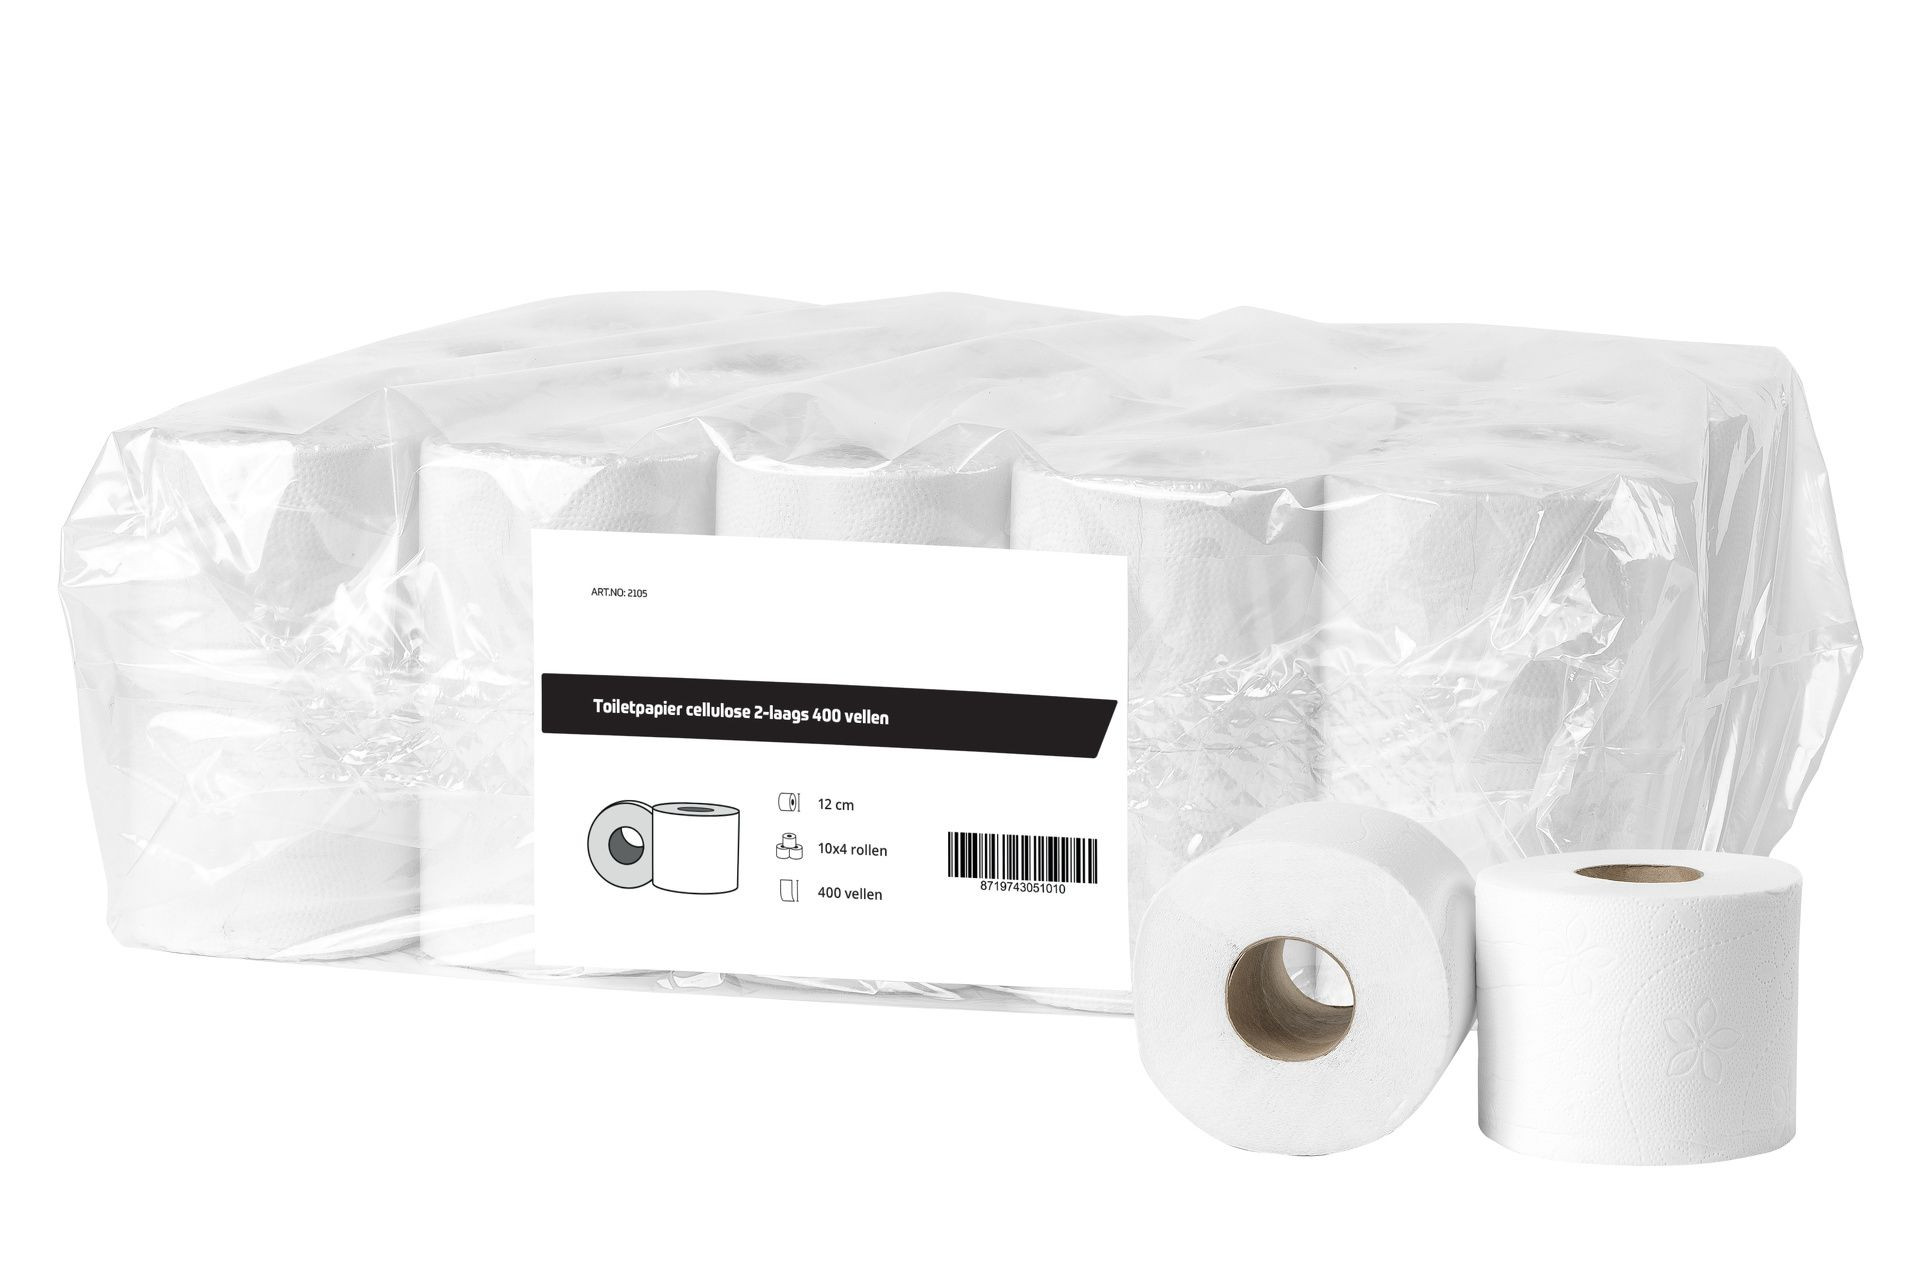 All Care Toiletpapier cellulose 2 laags/400 vel - 40 rollen